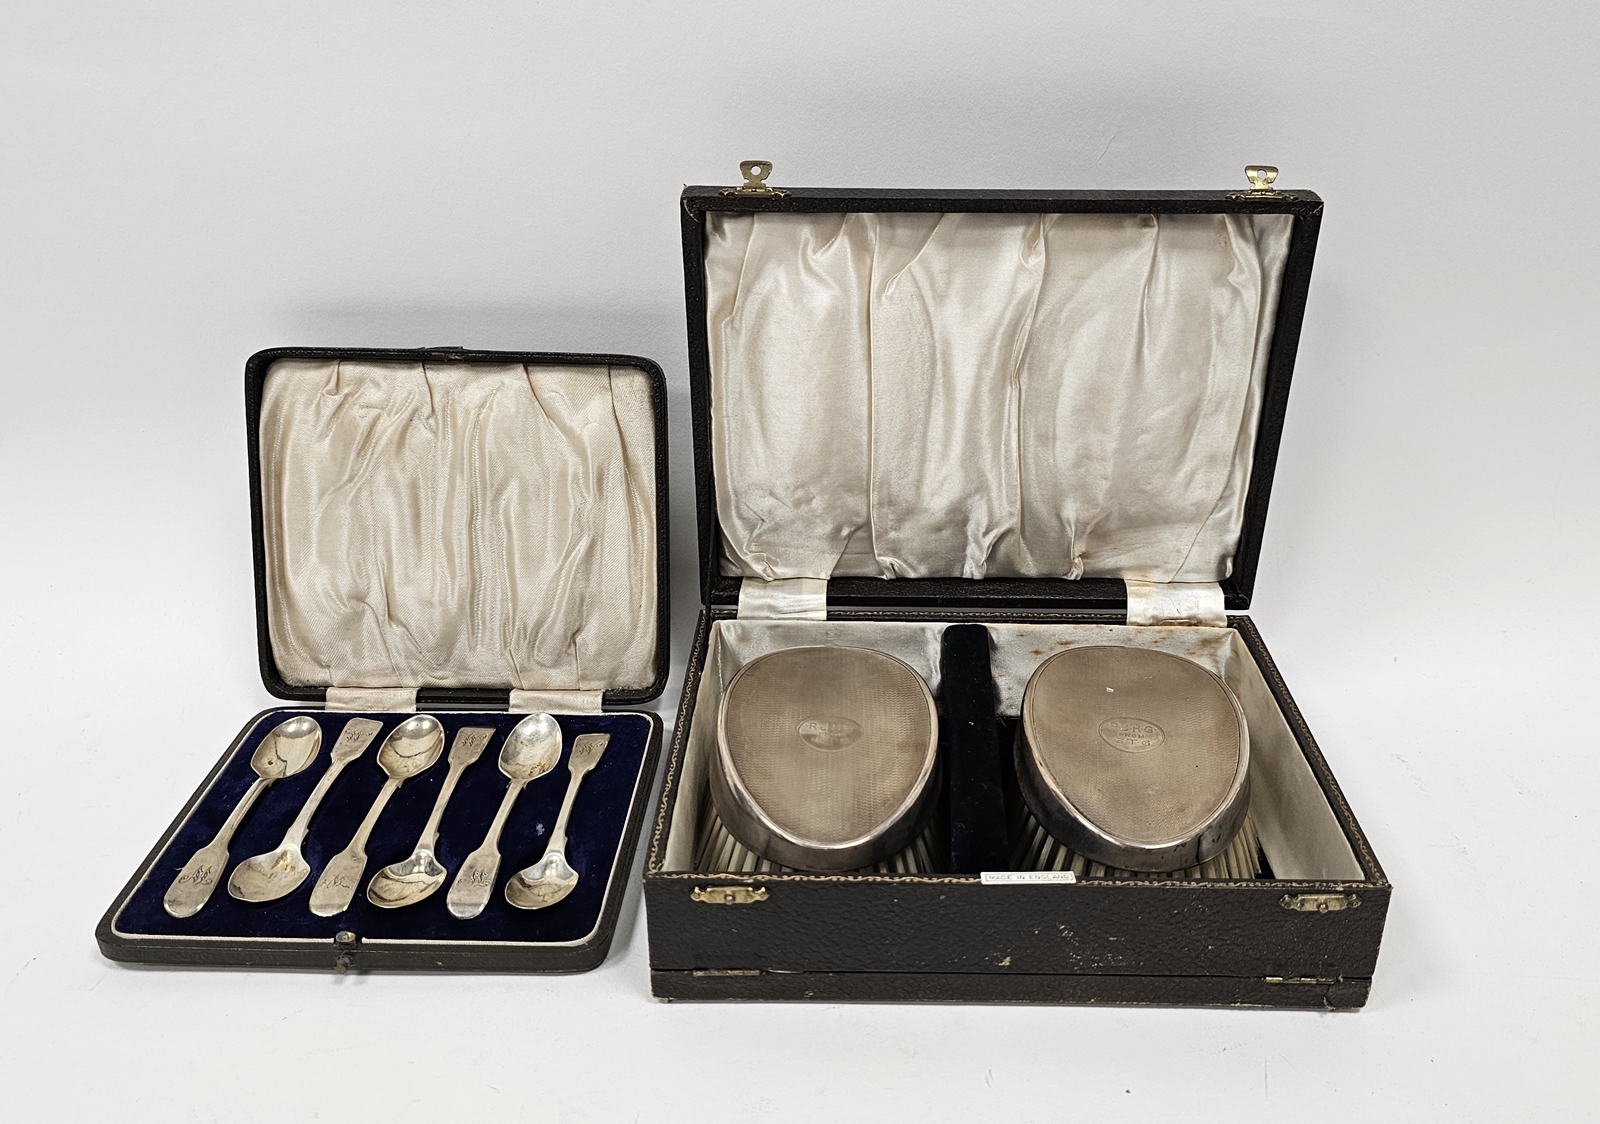 Five George IV silver fiddle pattern egg spoons by William Eaton, London 1824 and one other